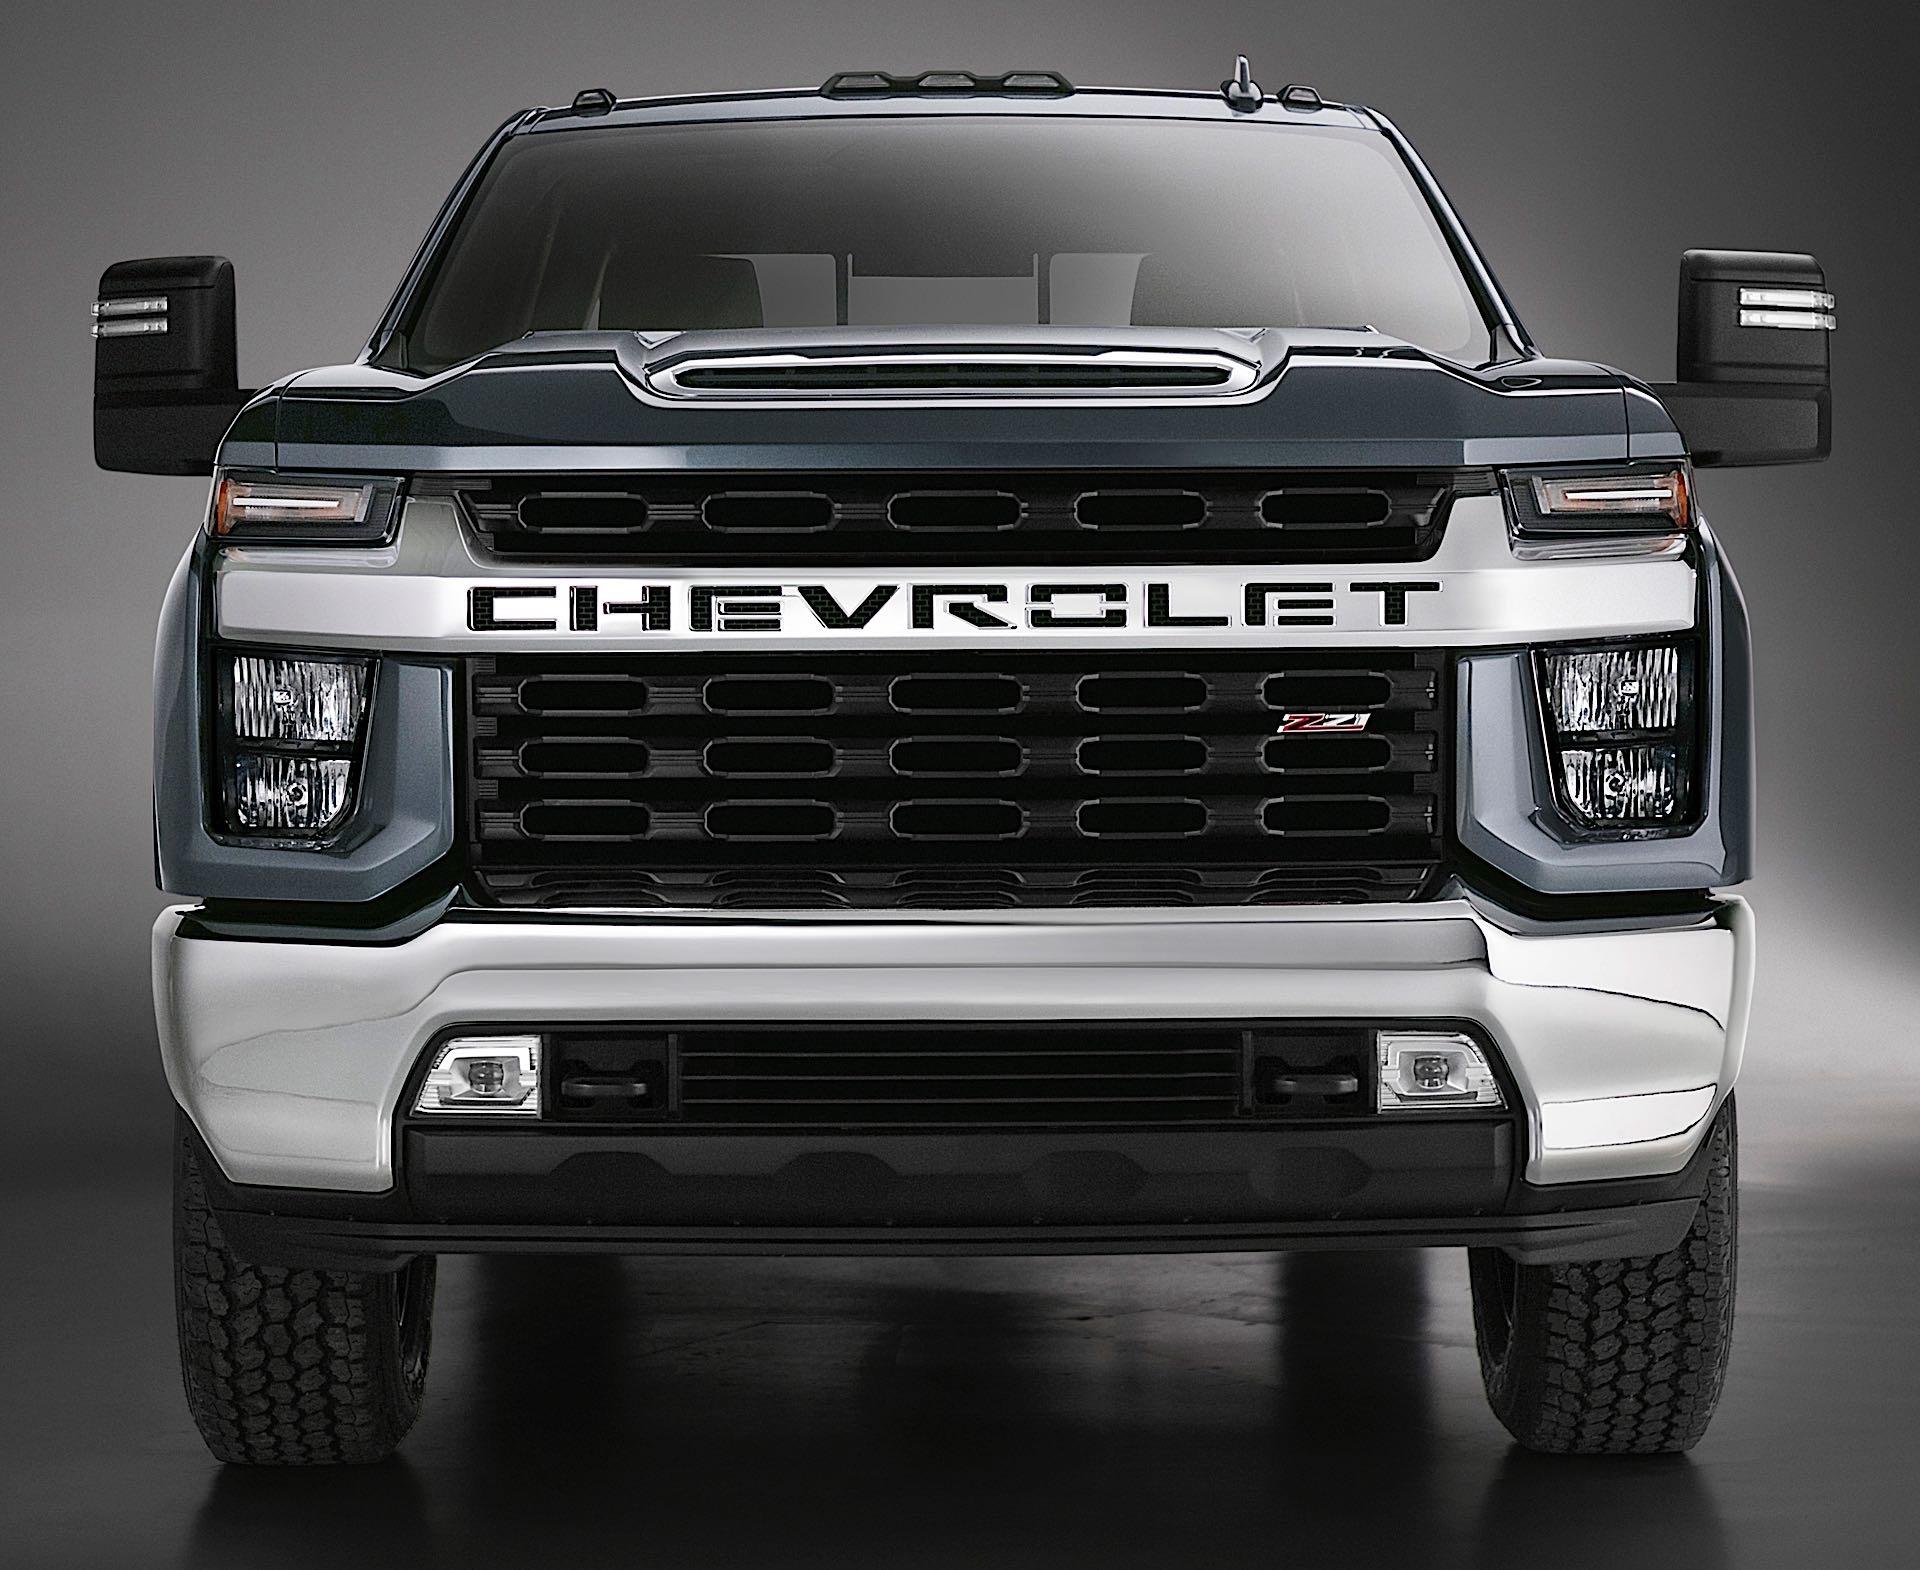 Chevrolet Silverado HD Teased With First Image